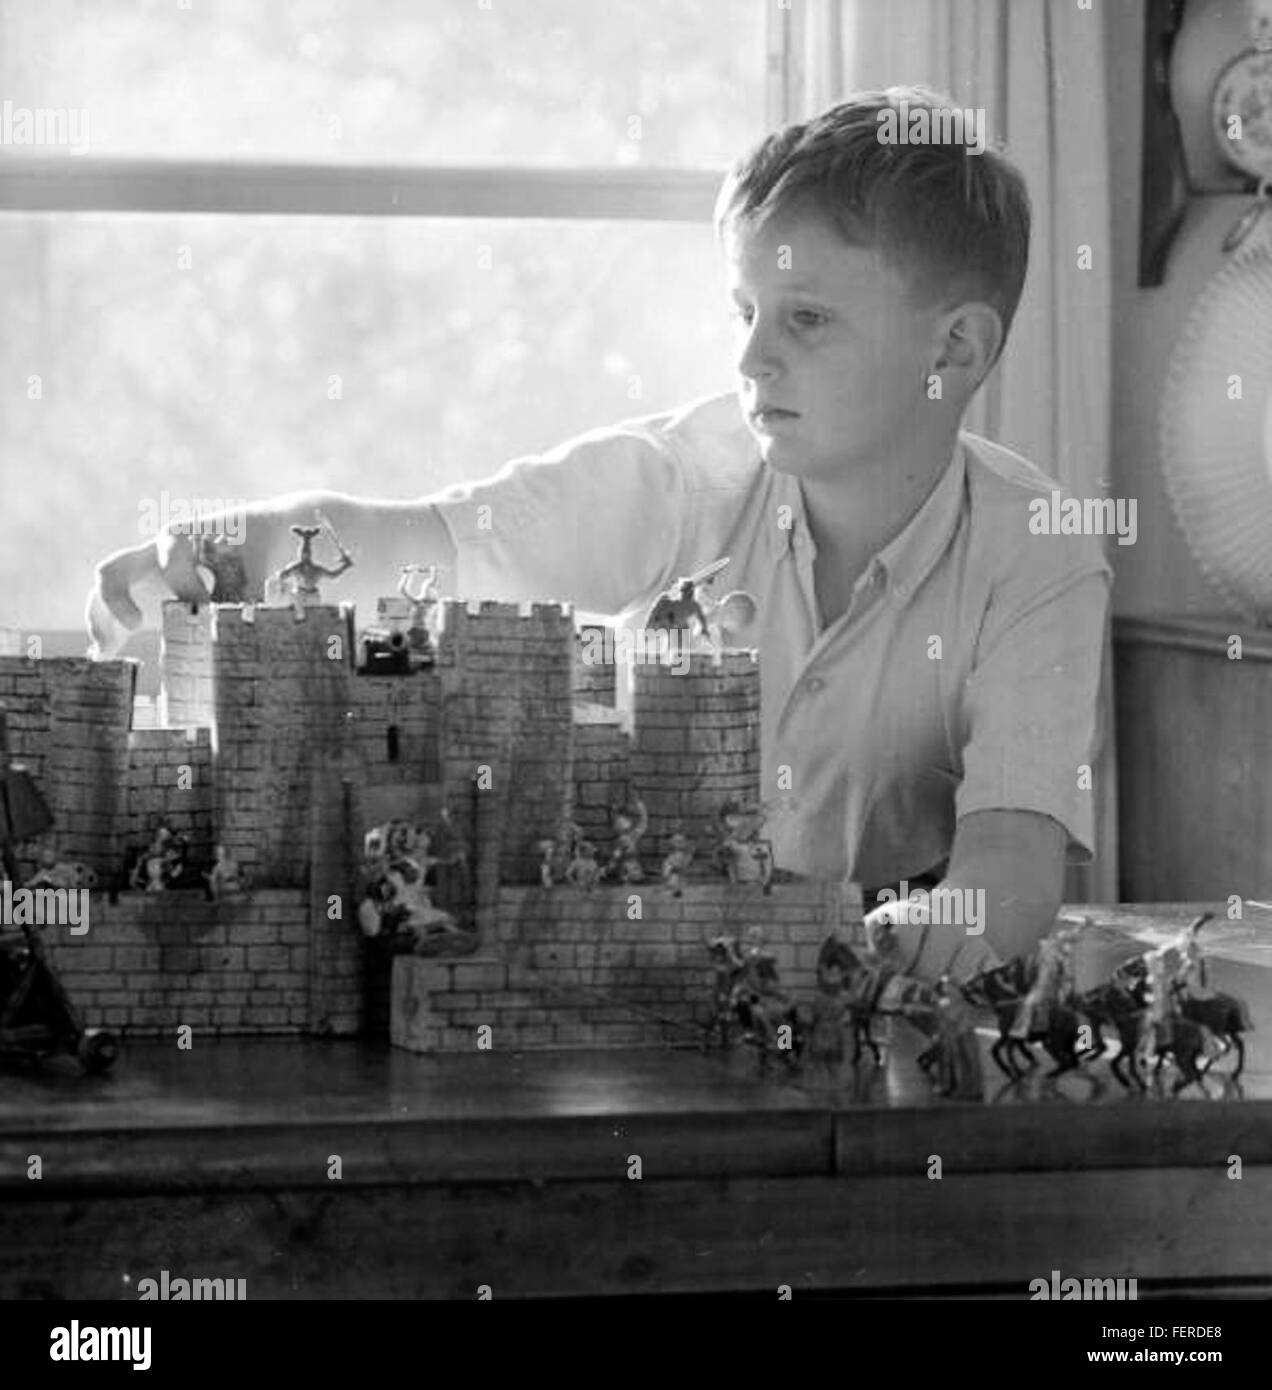 Boy with castle and toy soldiers - Tallahassee Boy with castle and toy soldiers - Tallahassee Stock Photo